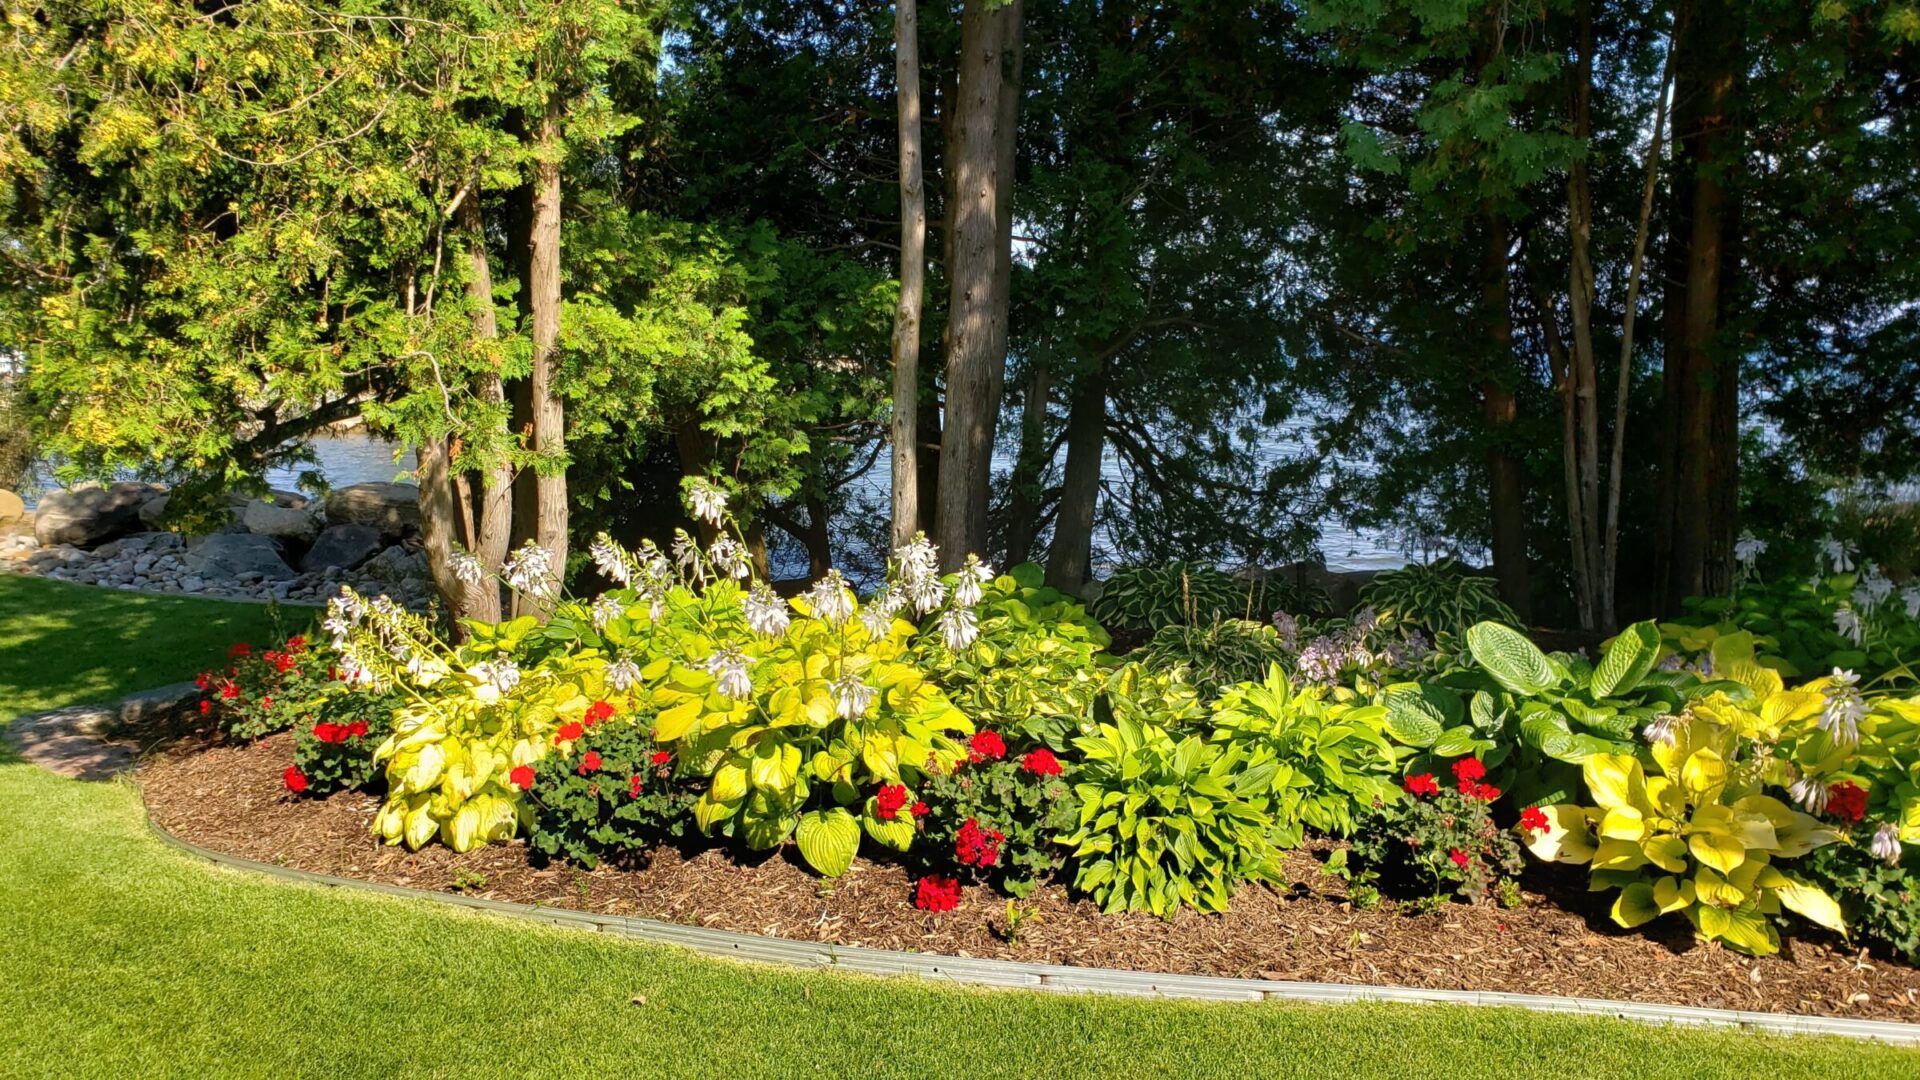 A well-maintained garden with lush greenery, vibrant red flowers, and hostas under tall trees, with a glimpse of water in the background.